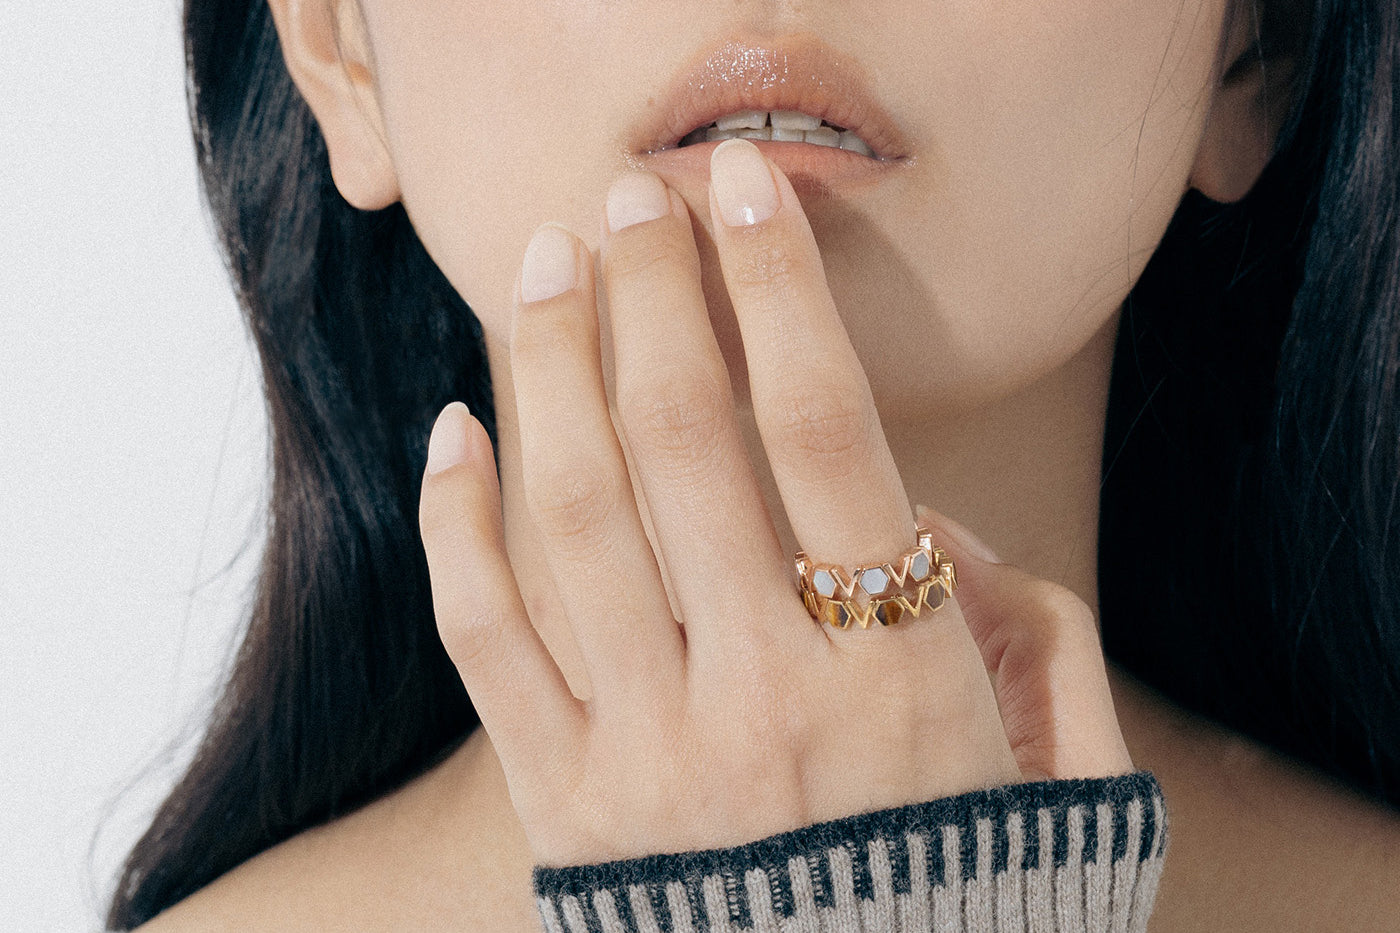 Model wears two Castle Bands, one White shell and the other Tiger’s Eye, as she touches her lips